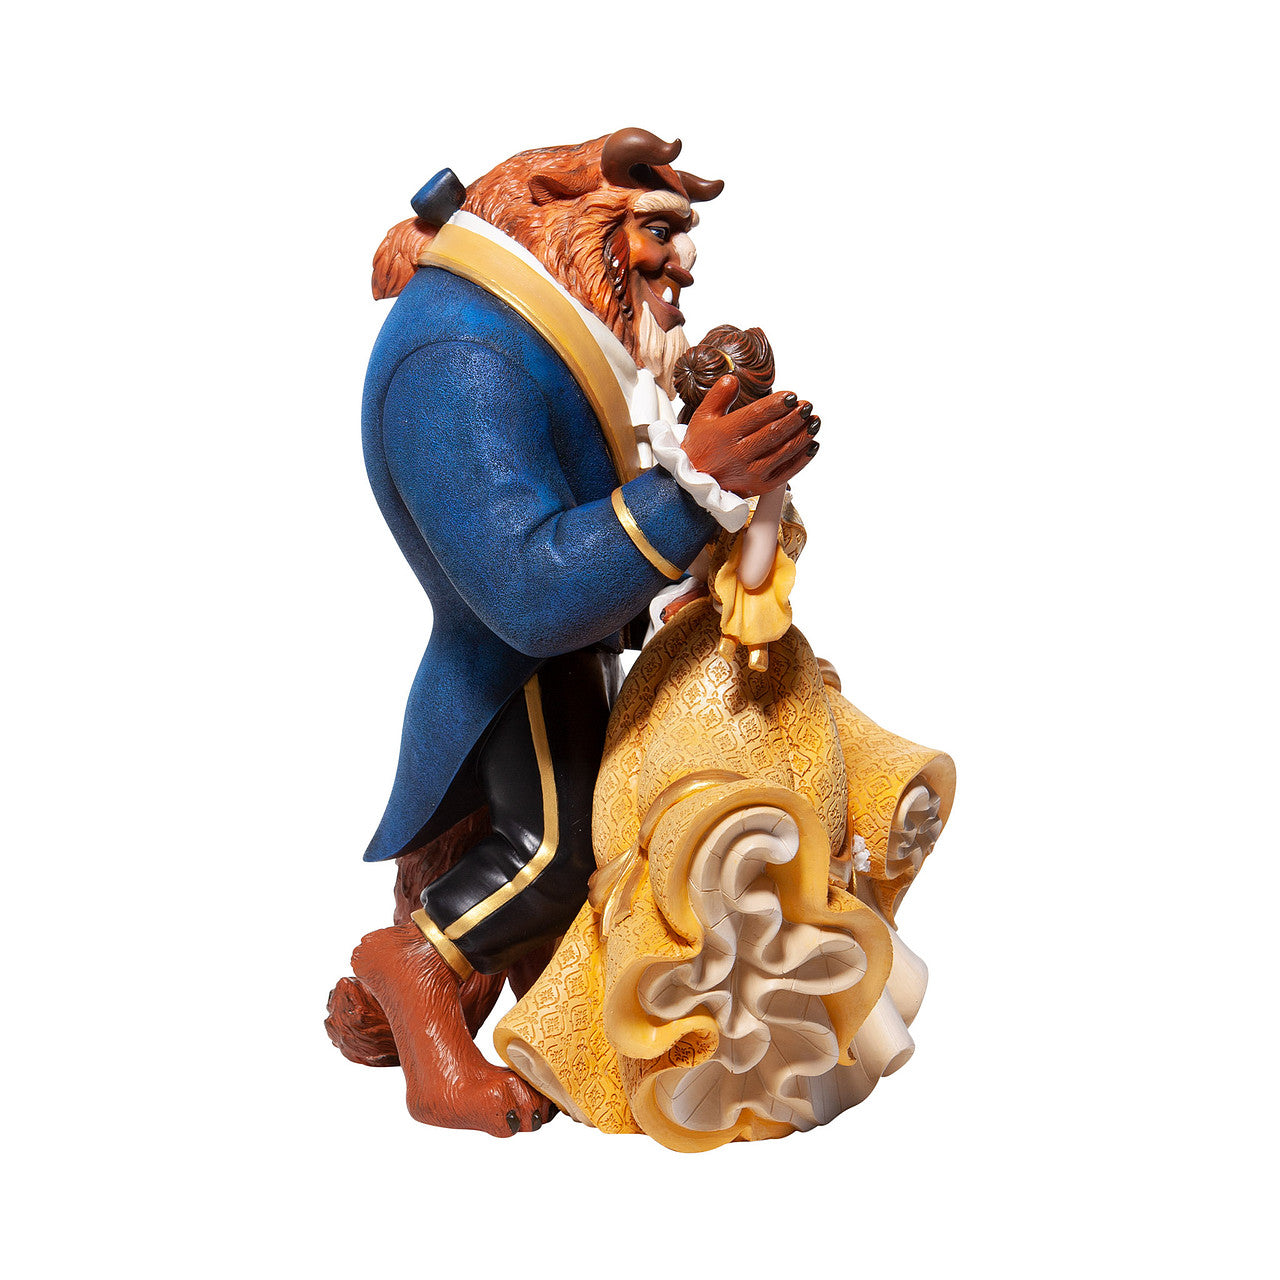 Beauty and the Beast - Deluxe Figurine